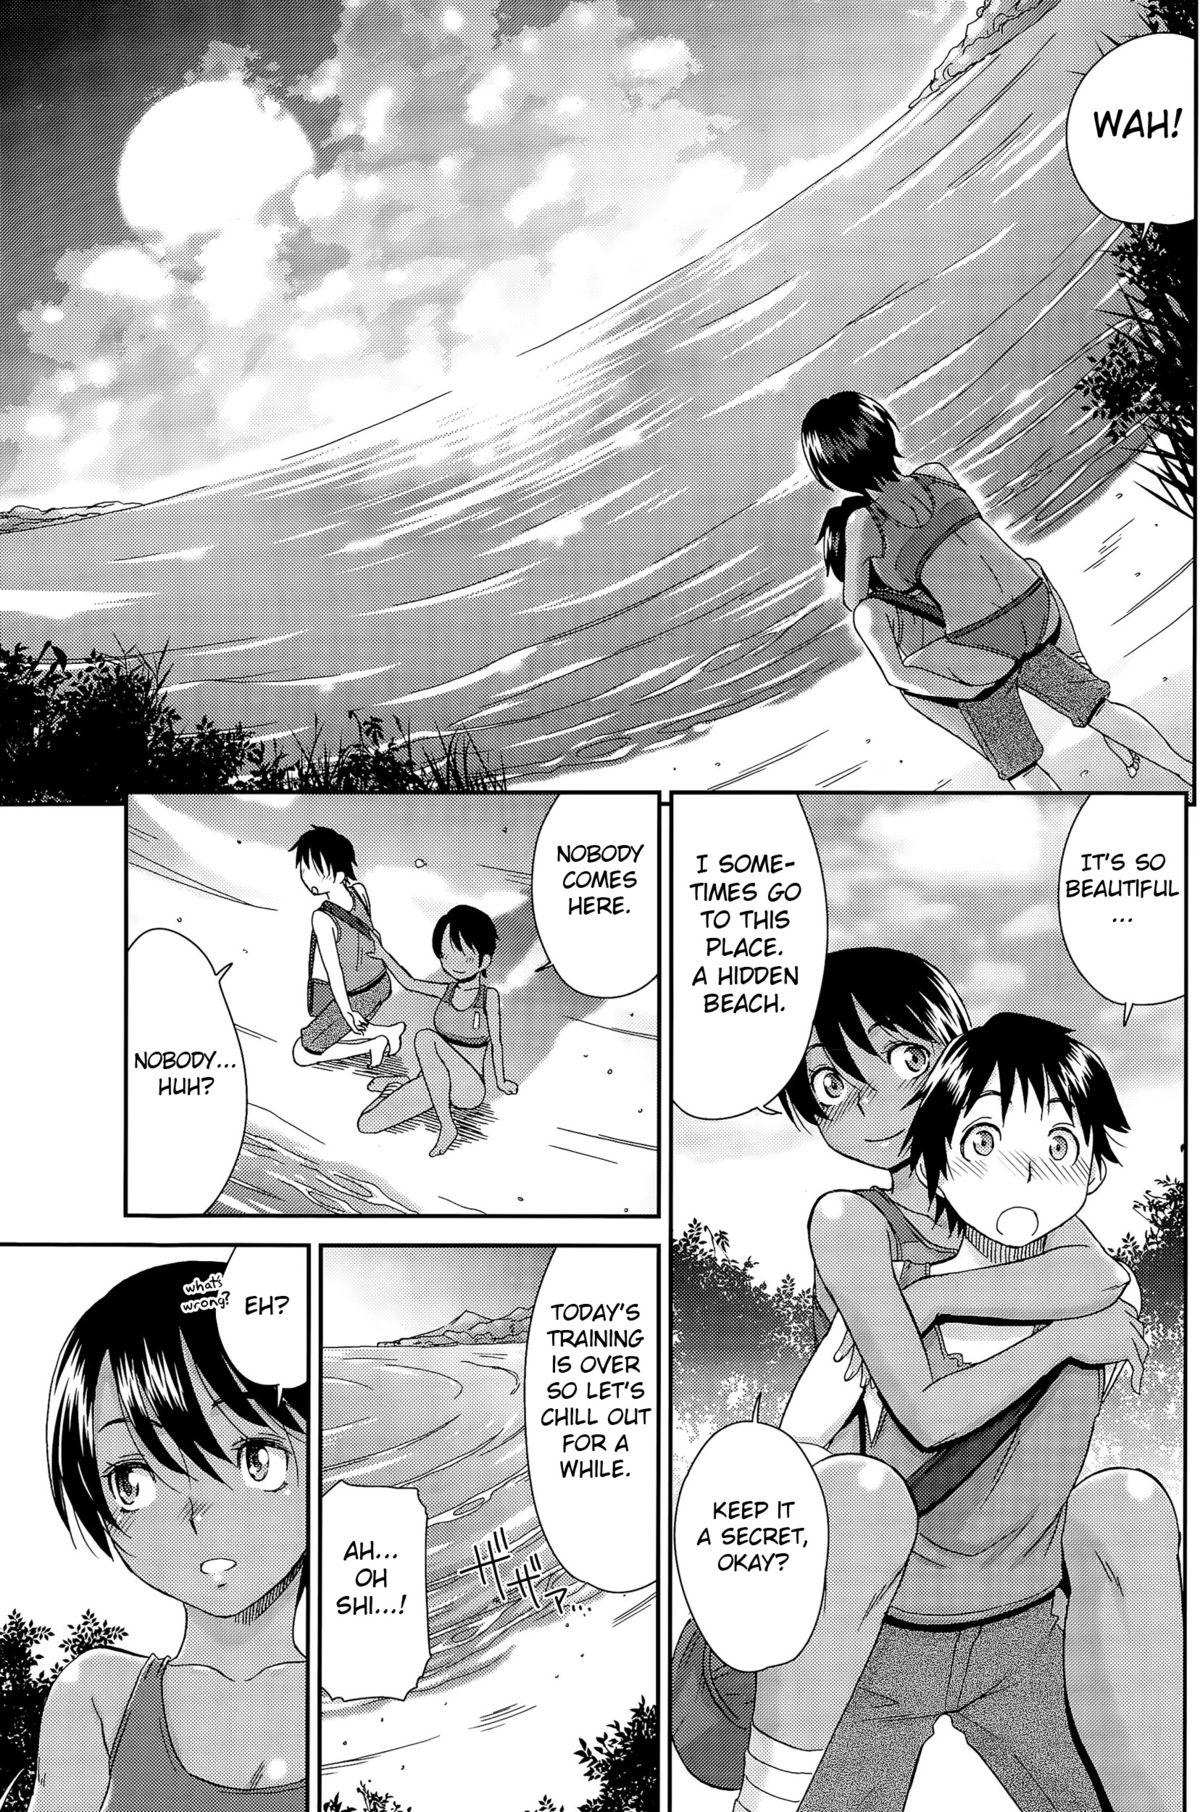 Classroom Beach de Kojinshidou - private lesson at the beach Pigtails - Page 9